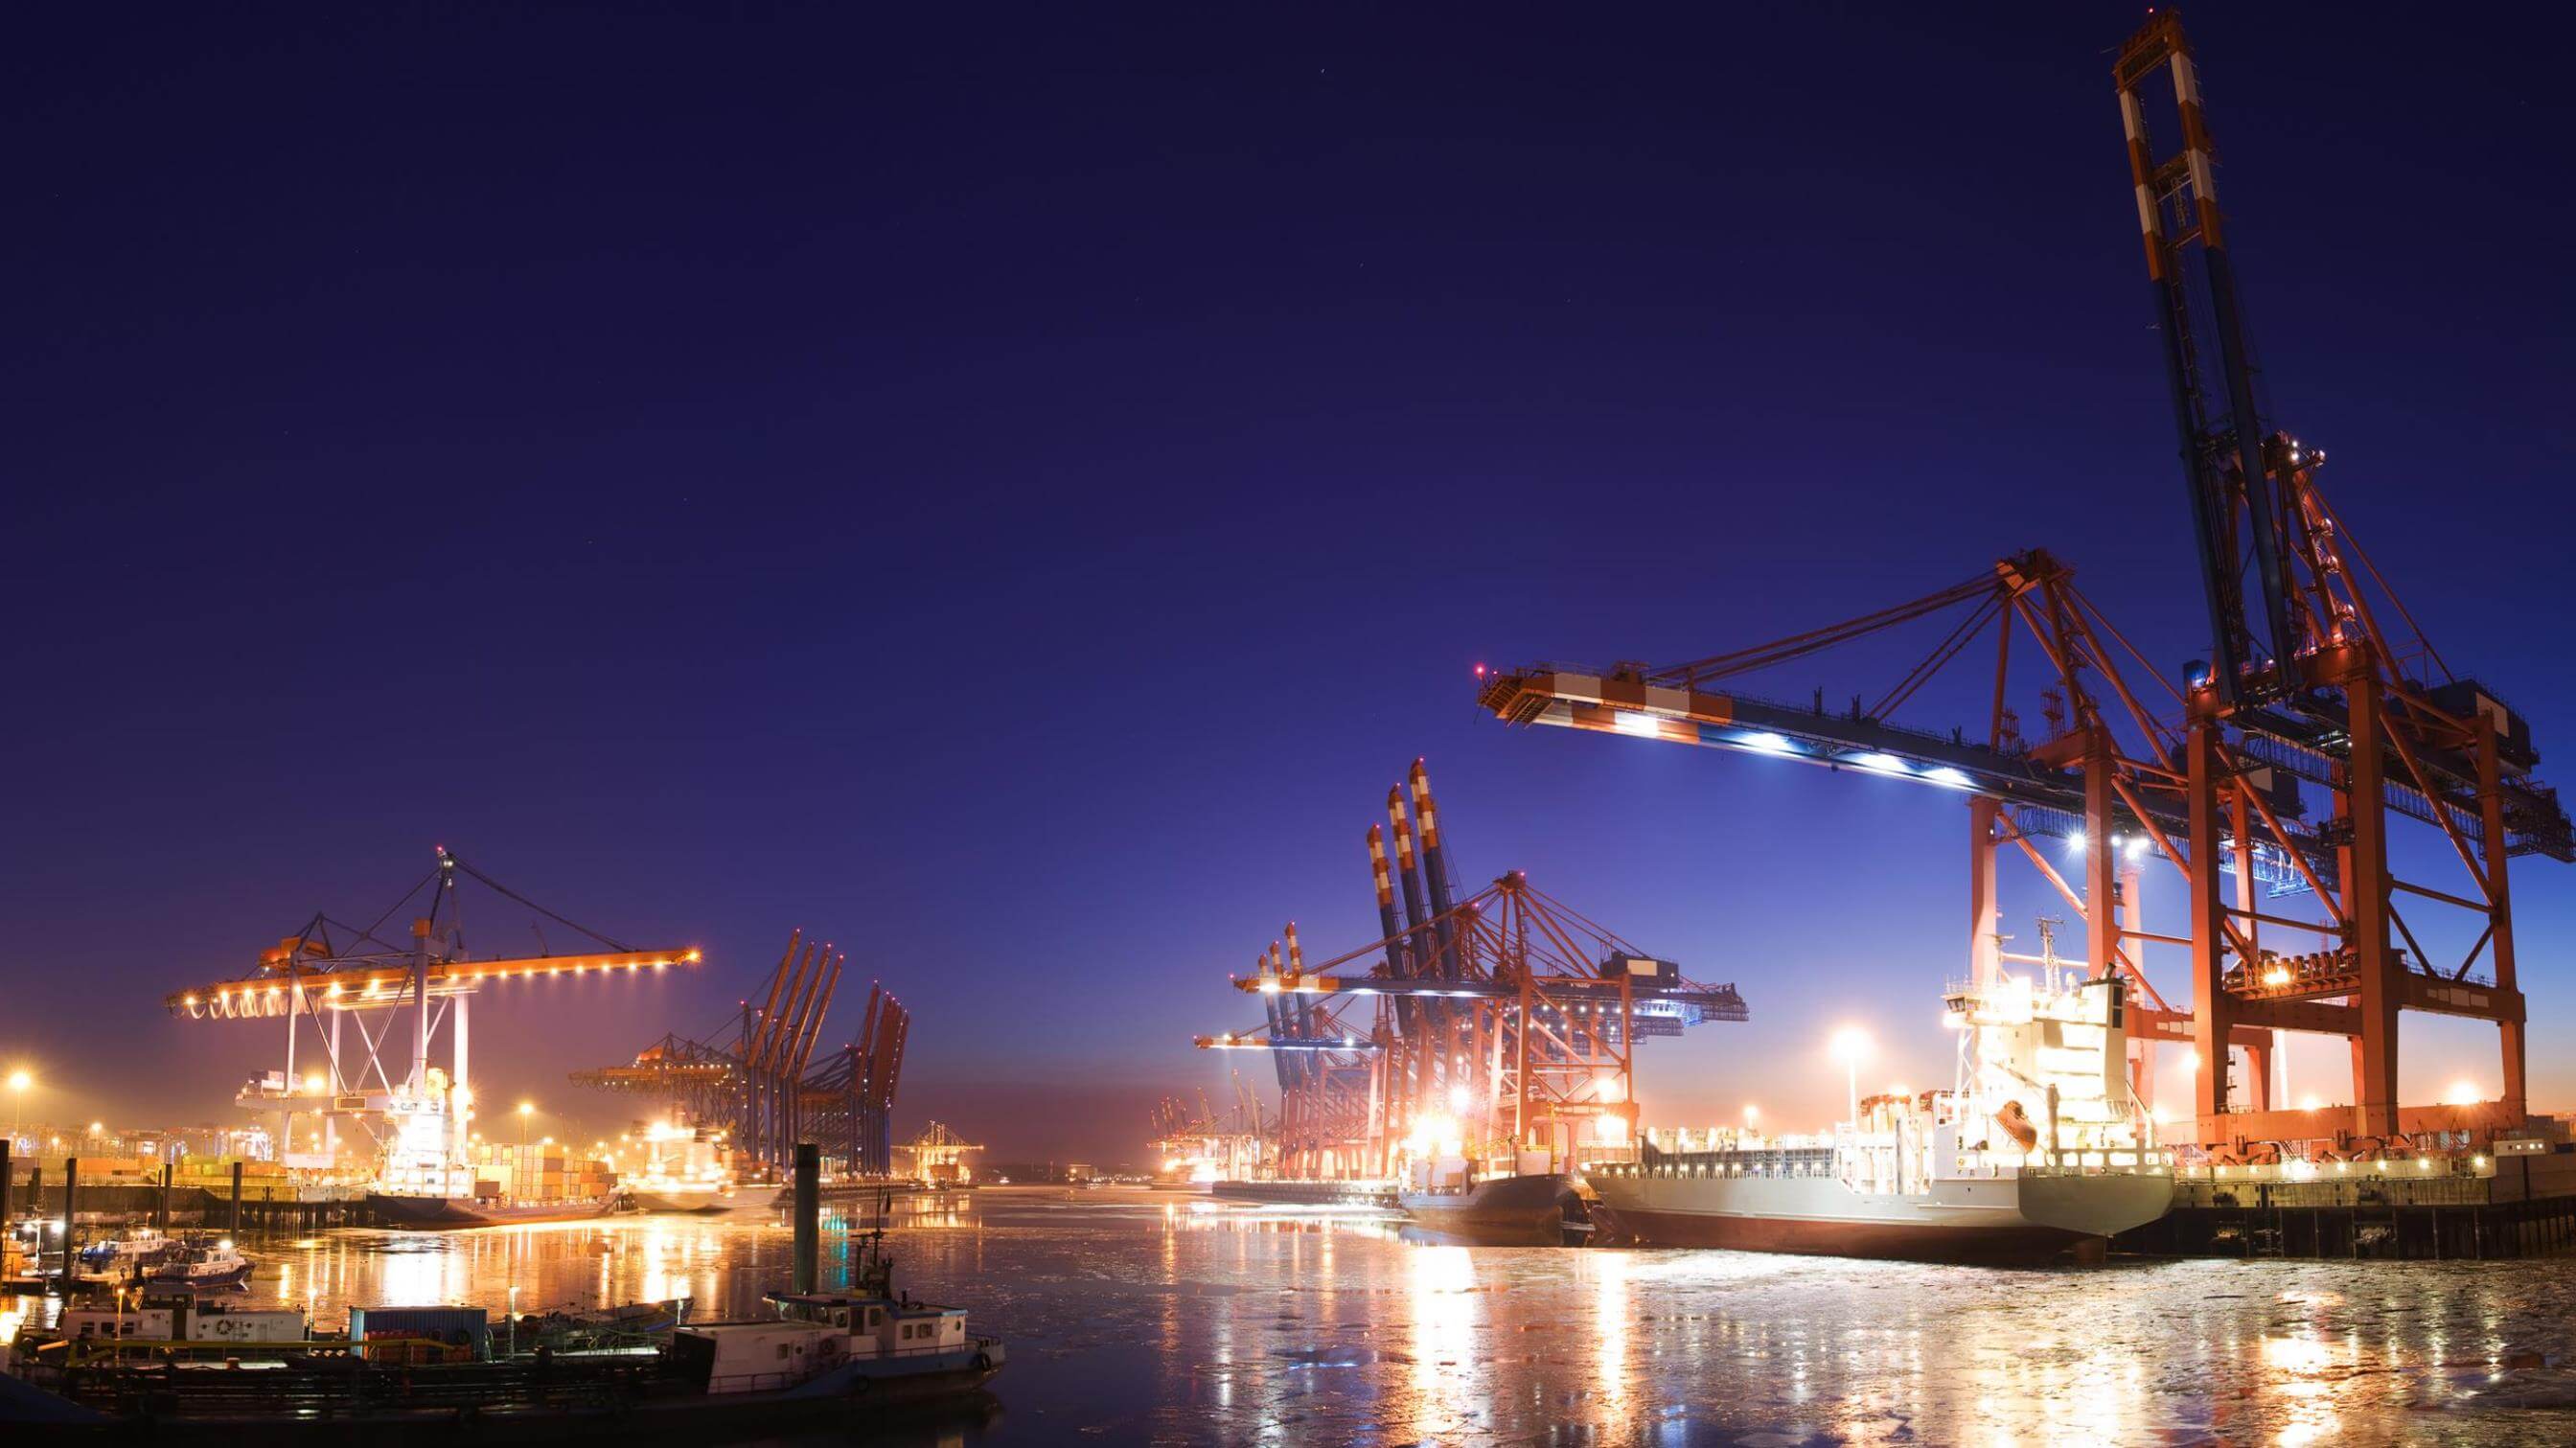 2020 Global Container Shipping Outlook | AlixPartners